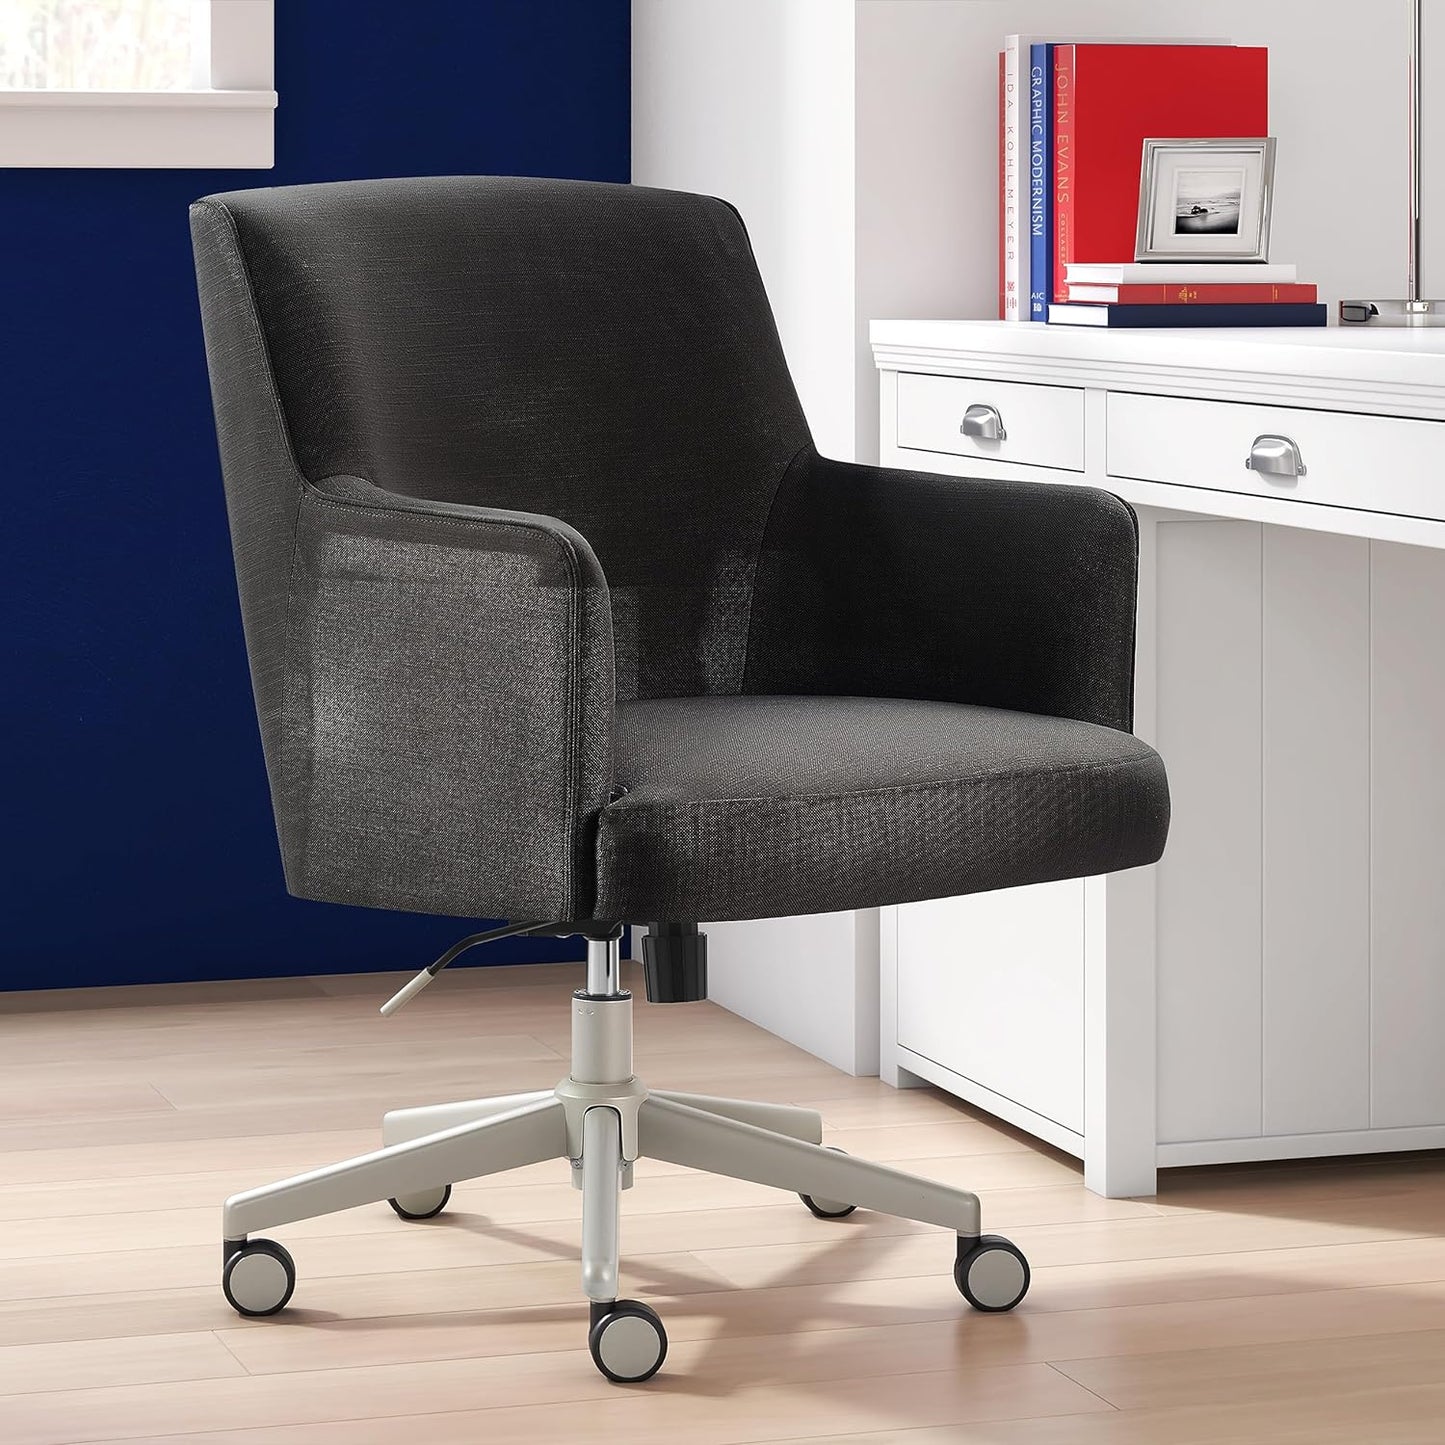 NEW in Box - Tommy Hilfiger Belmont Home Office Chair Adjustable Height and 360 Swivel for Computer Desk, Stainless Steel Base with Smooth Rolling Casters, Twill Fabric Upholstery, Twill Fabric Dark Gray - Retail $285